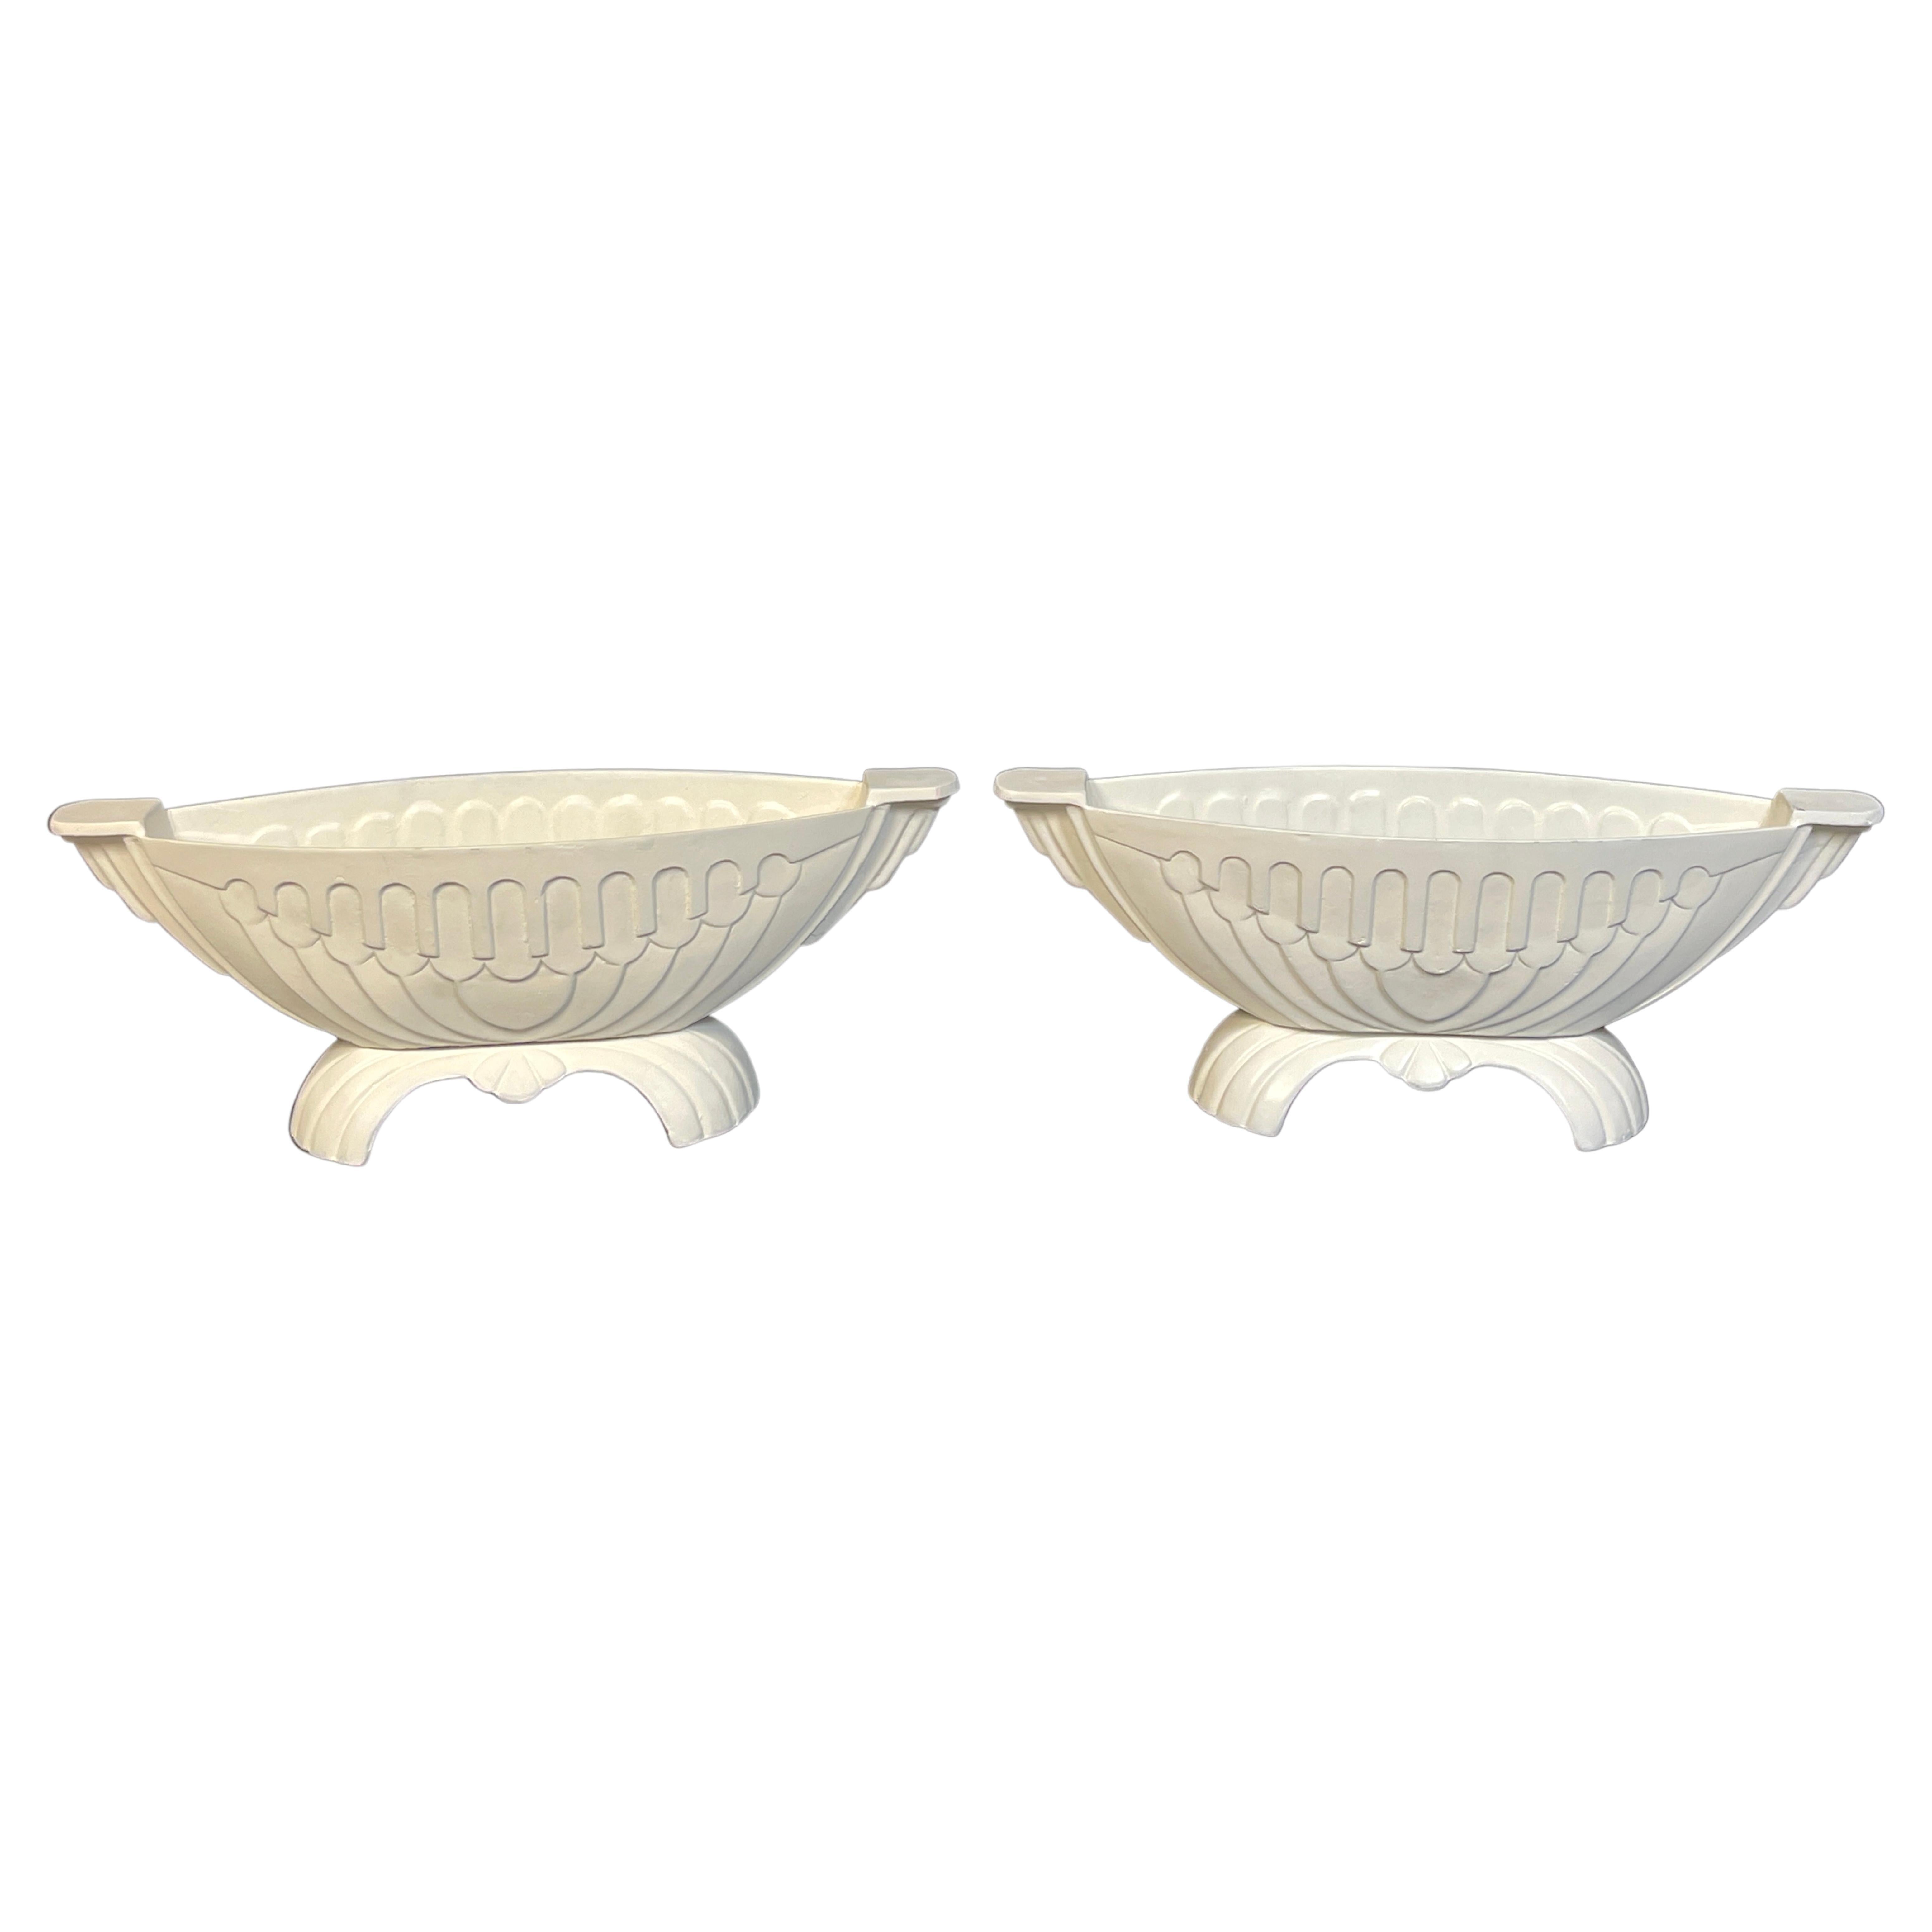 Pair of Art Deco Channeled & Arch Design Oval Garden Urns For Sale